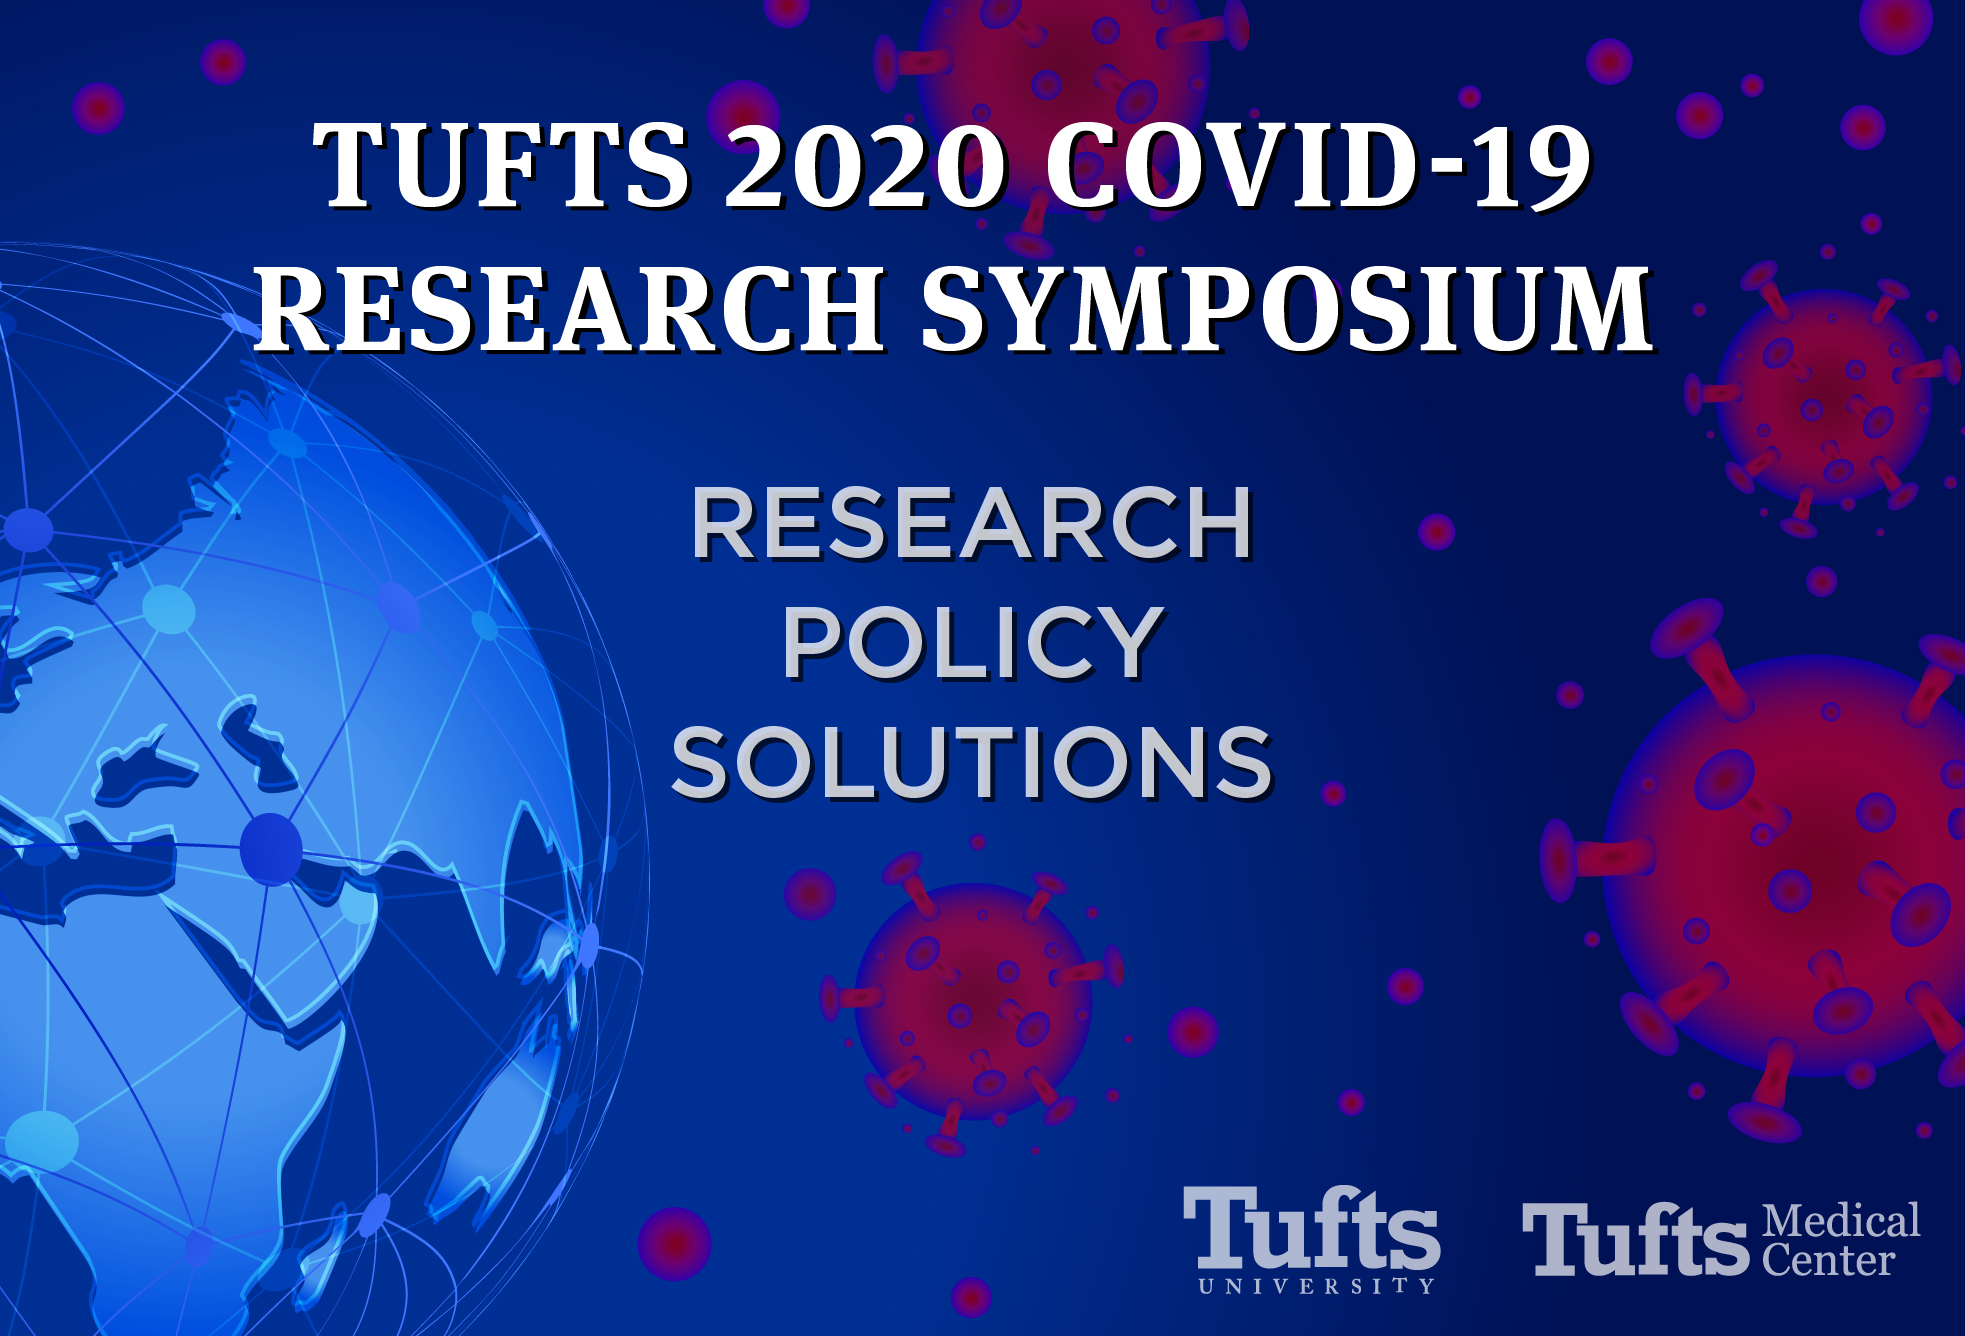 Tufts 2020 COVID-19 Research Symposium